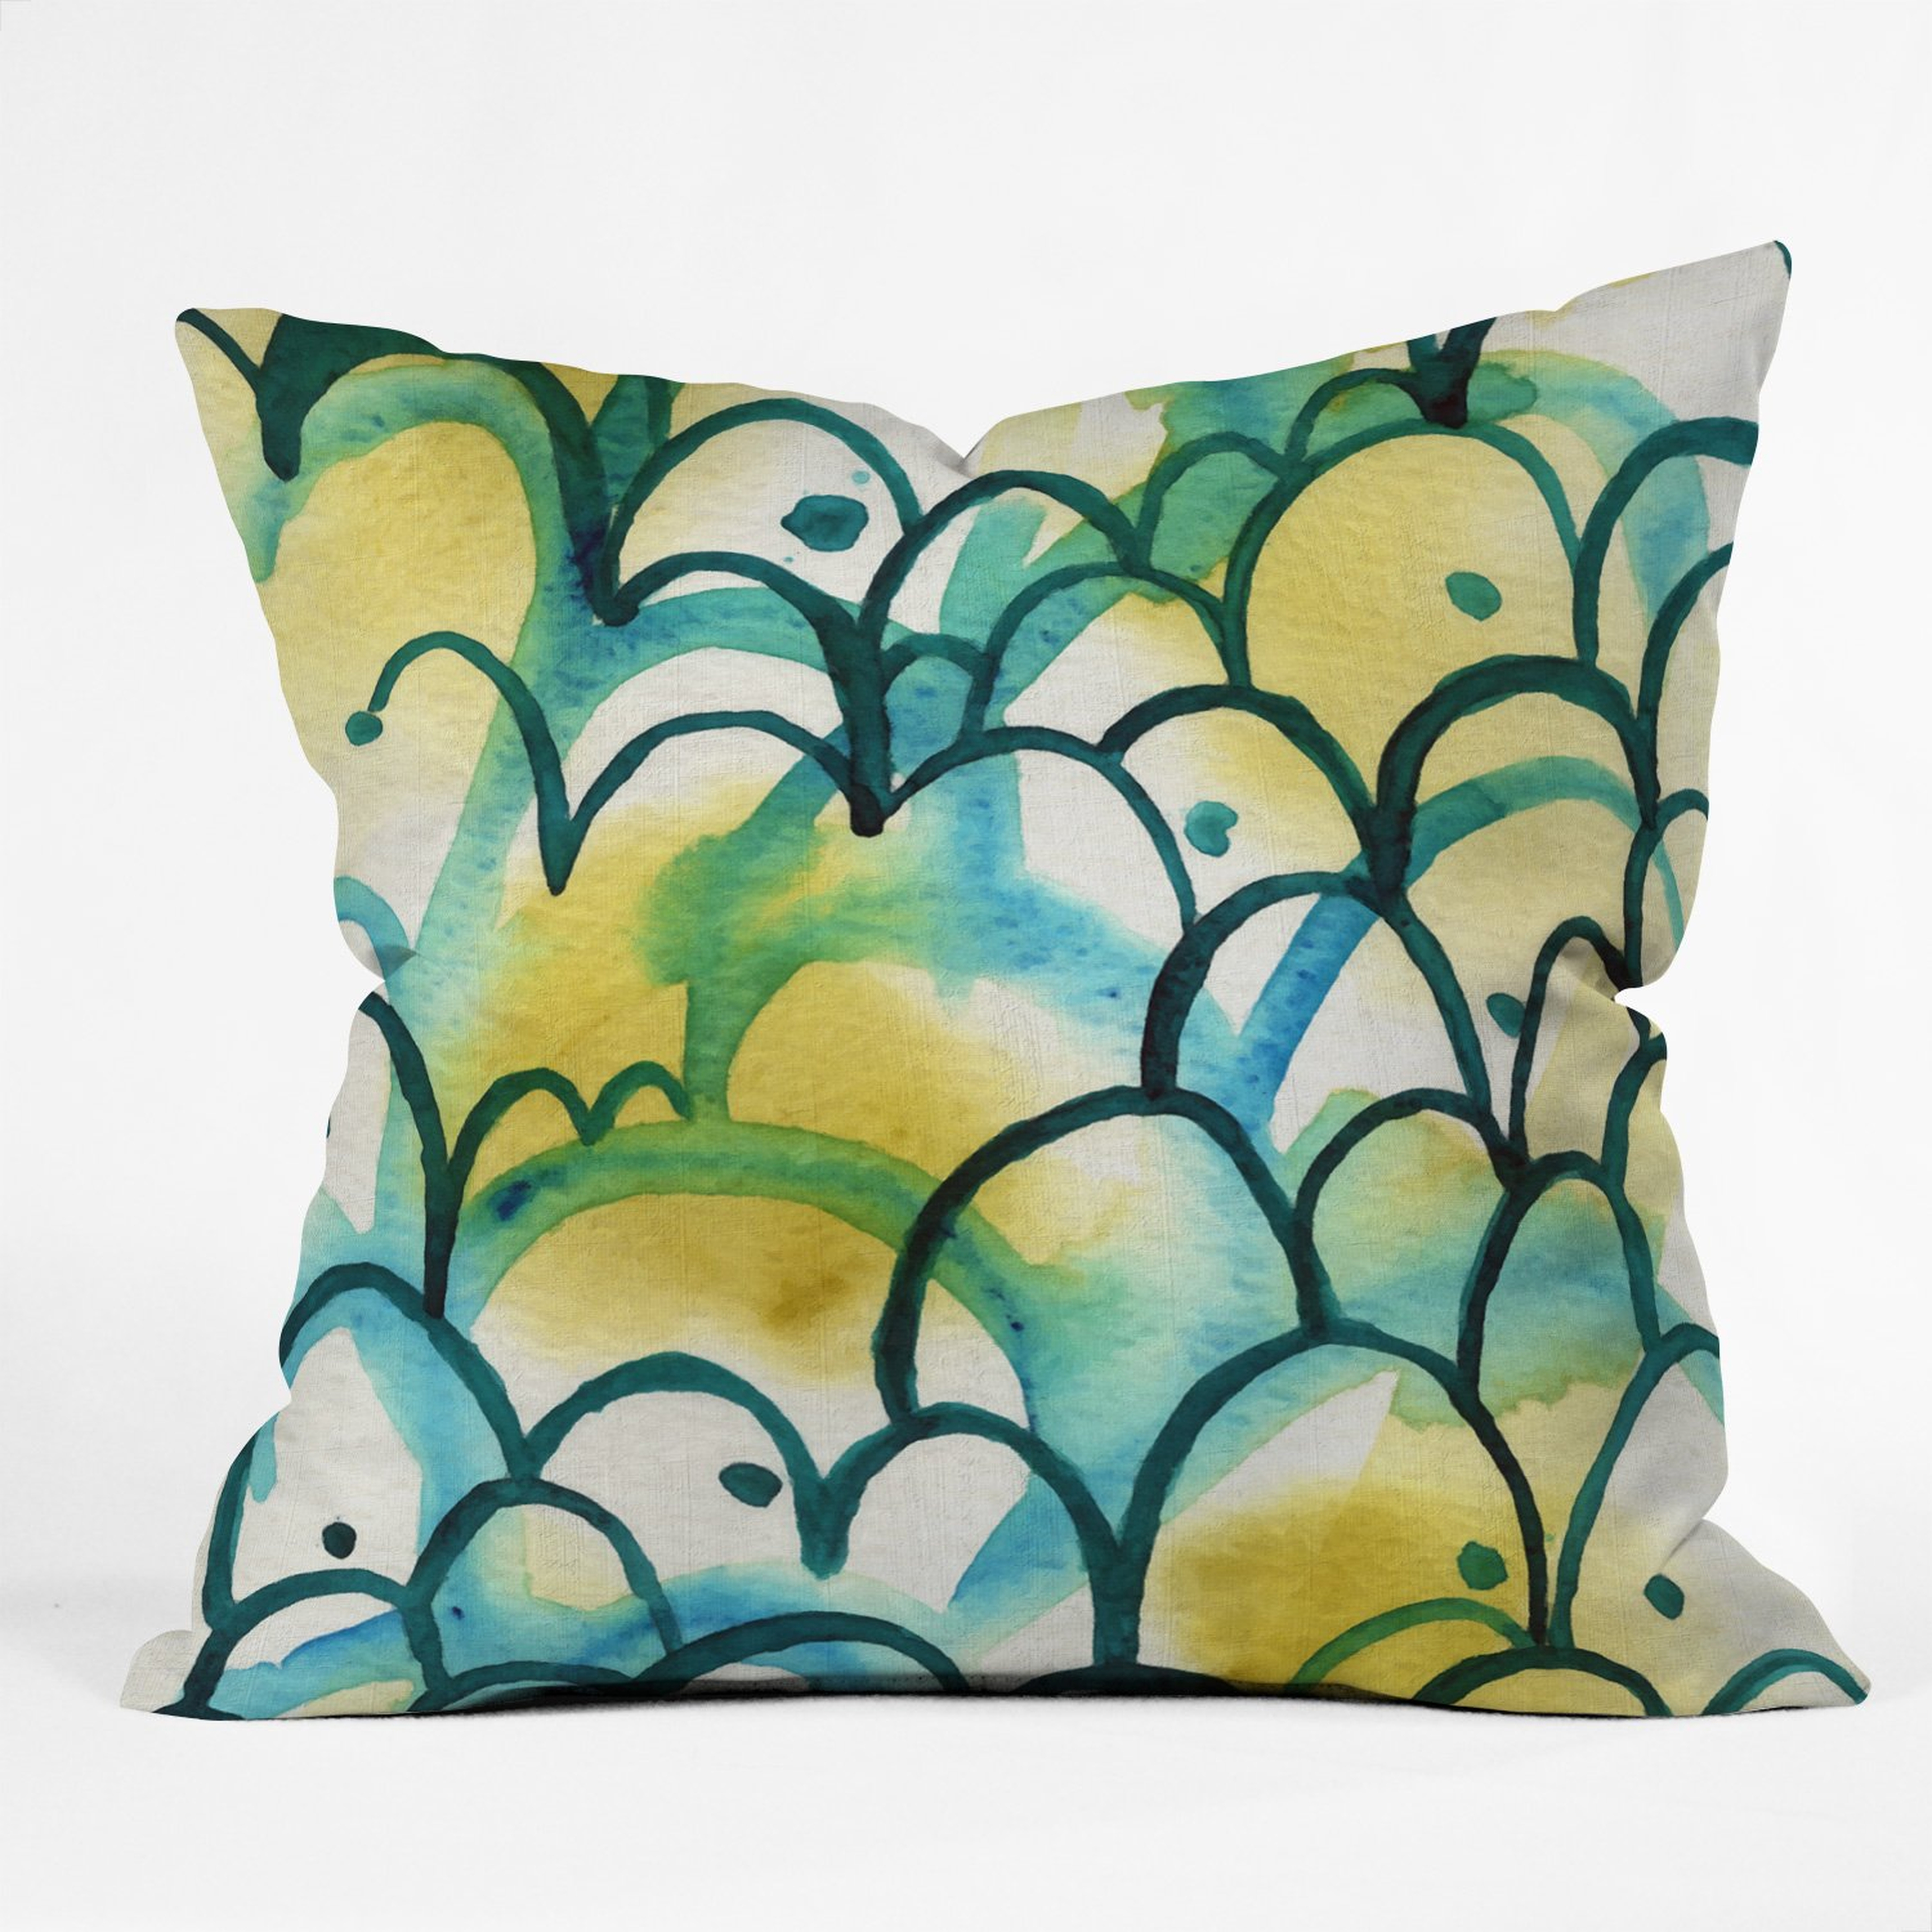 GREEN AND BLUE  BY ELENA BLANCO throw pillow - Wander Print Co.